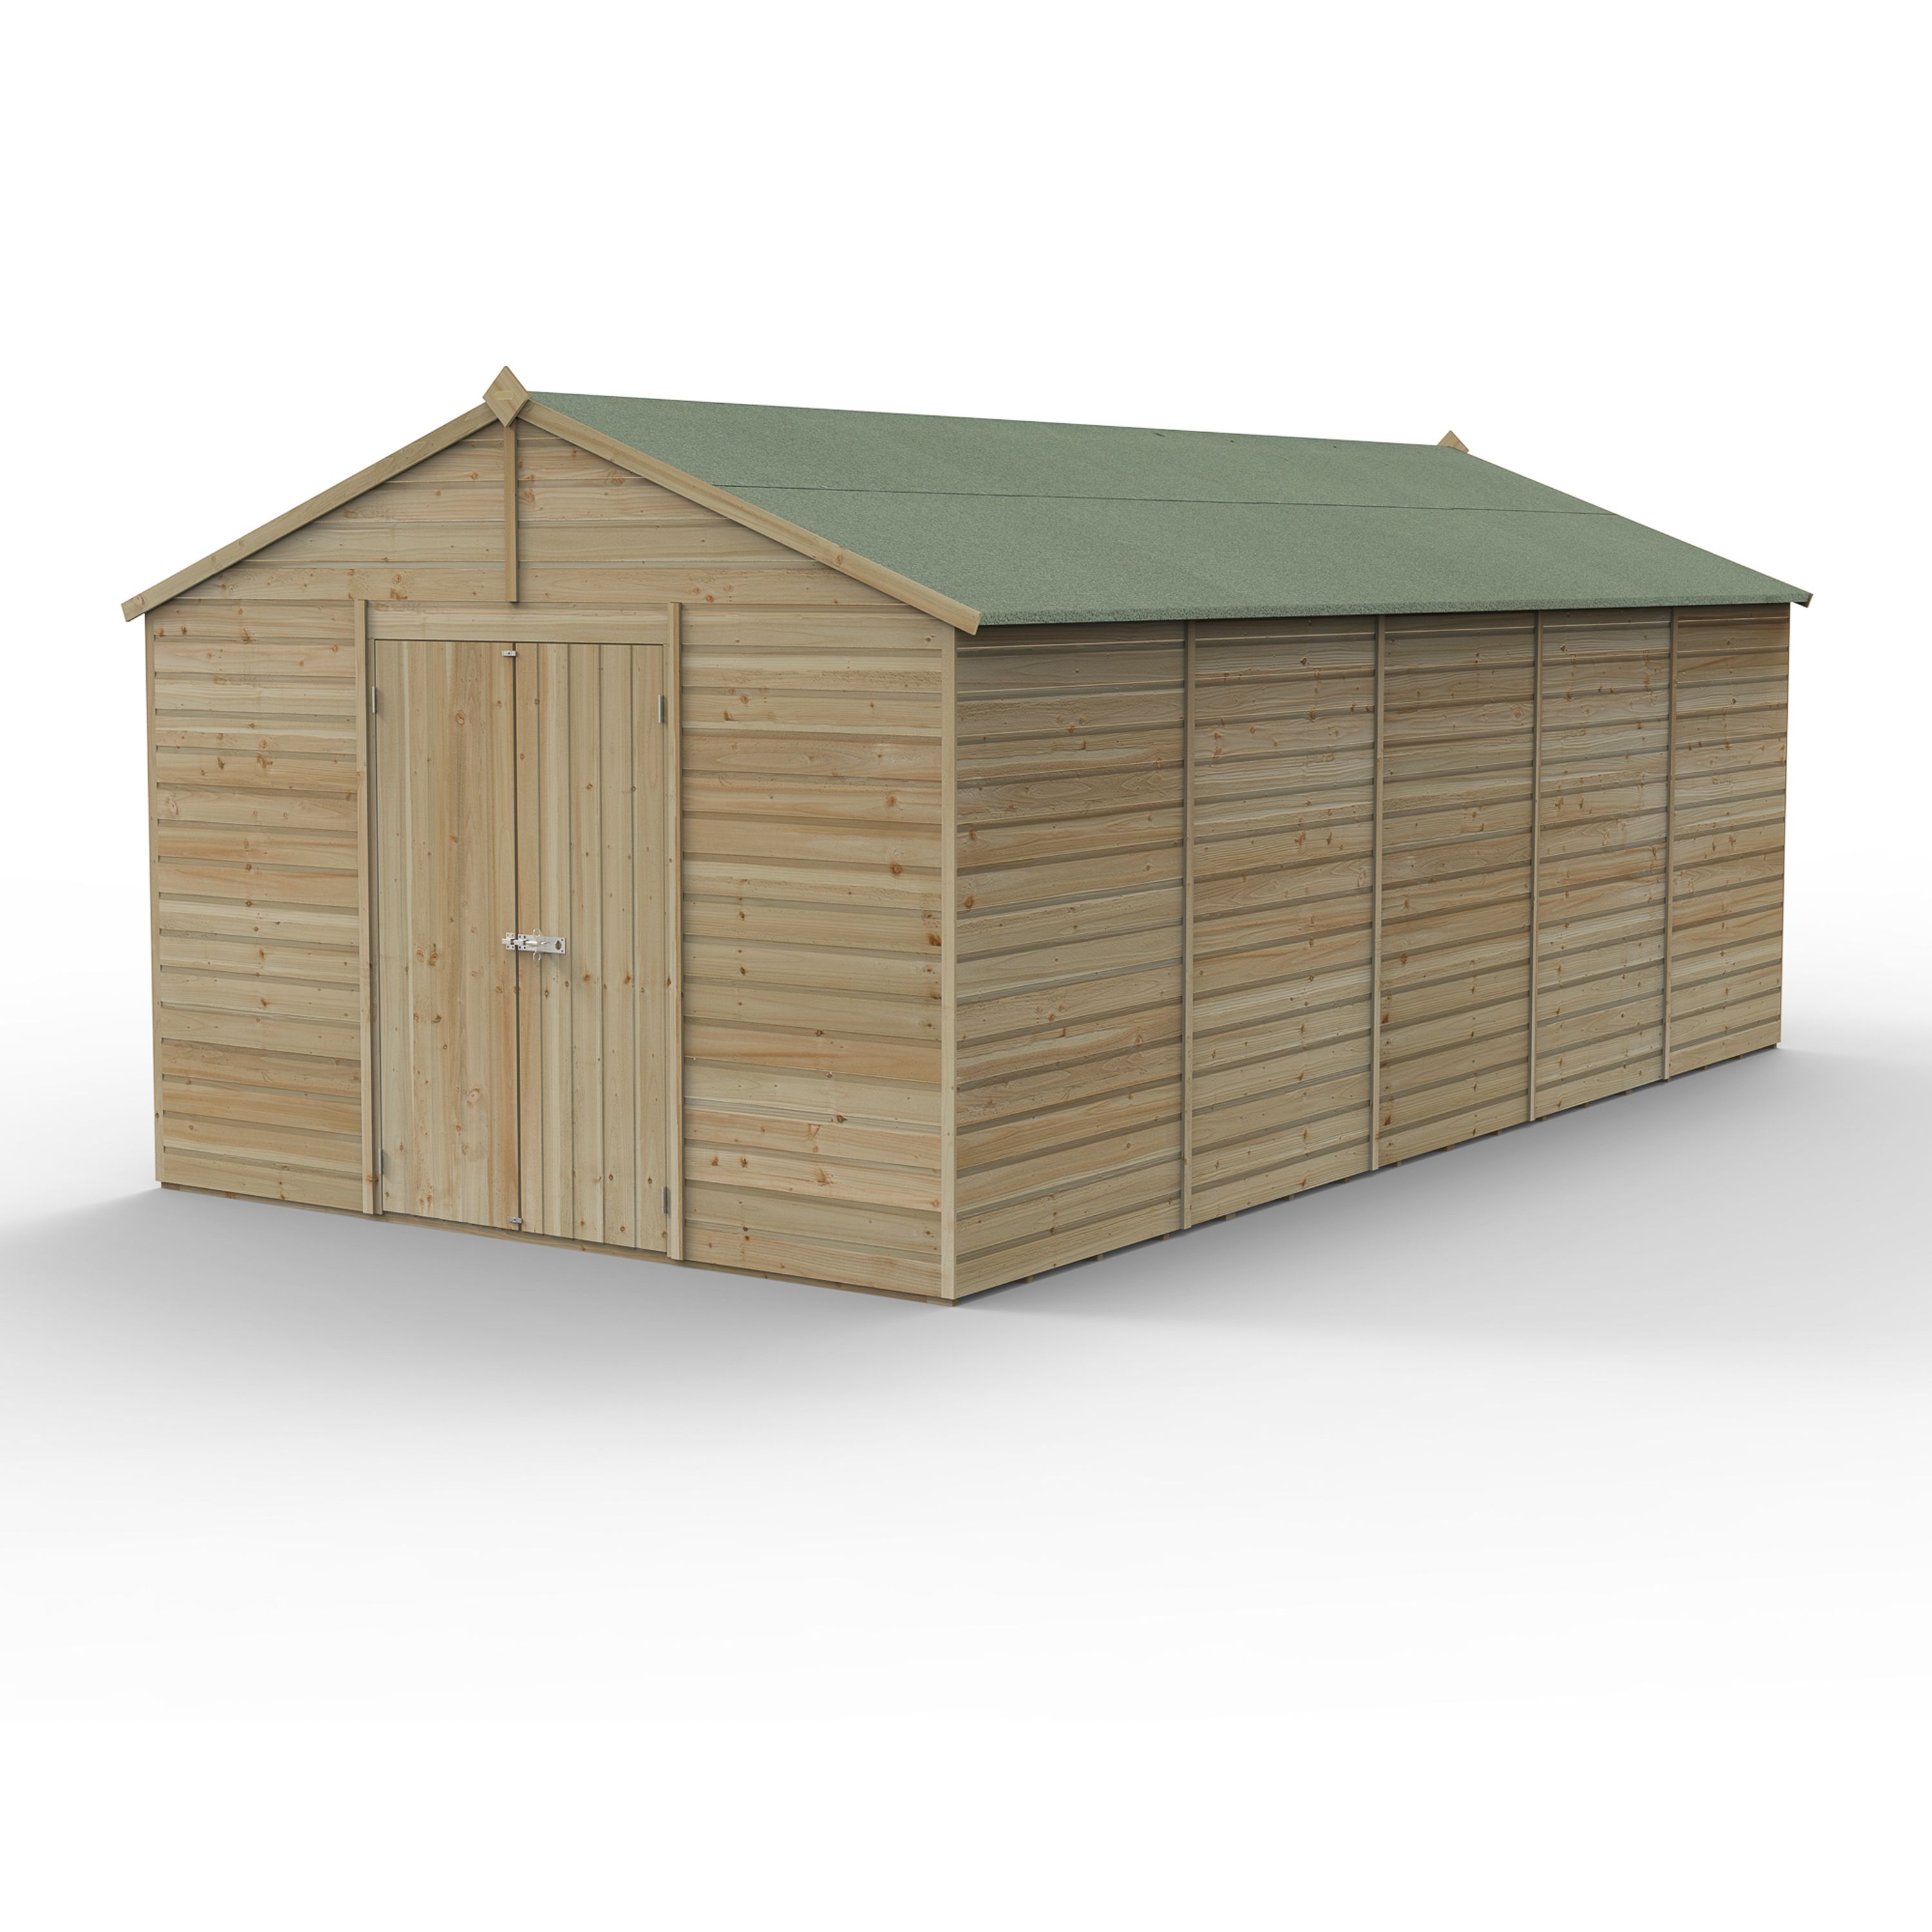 Forest Garden Beckwood 20x10 ft Apex Natural timber Wooden 2 door Shed with floor (Base included)